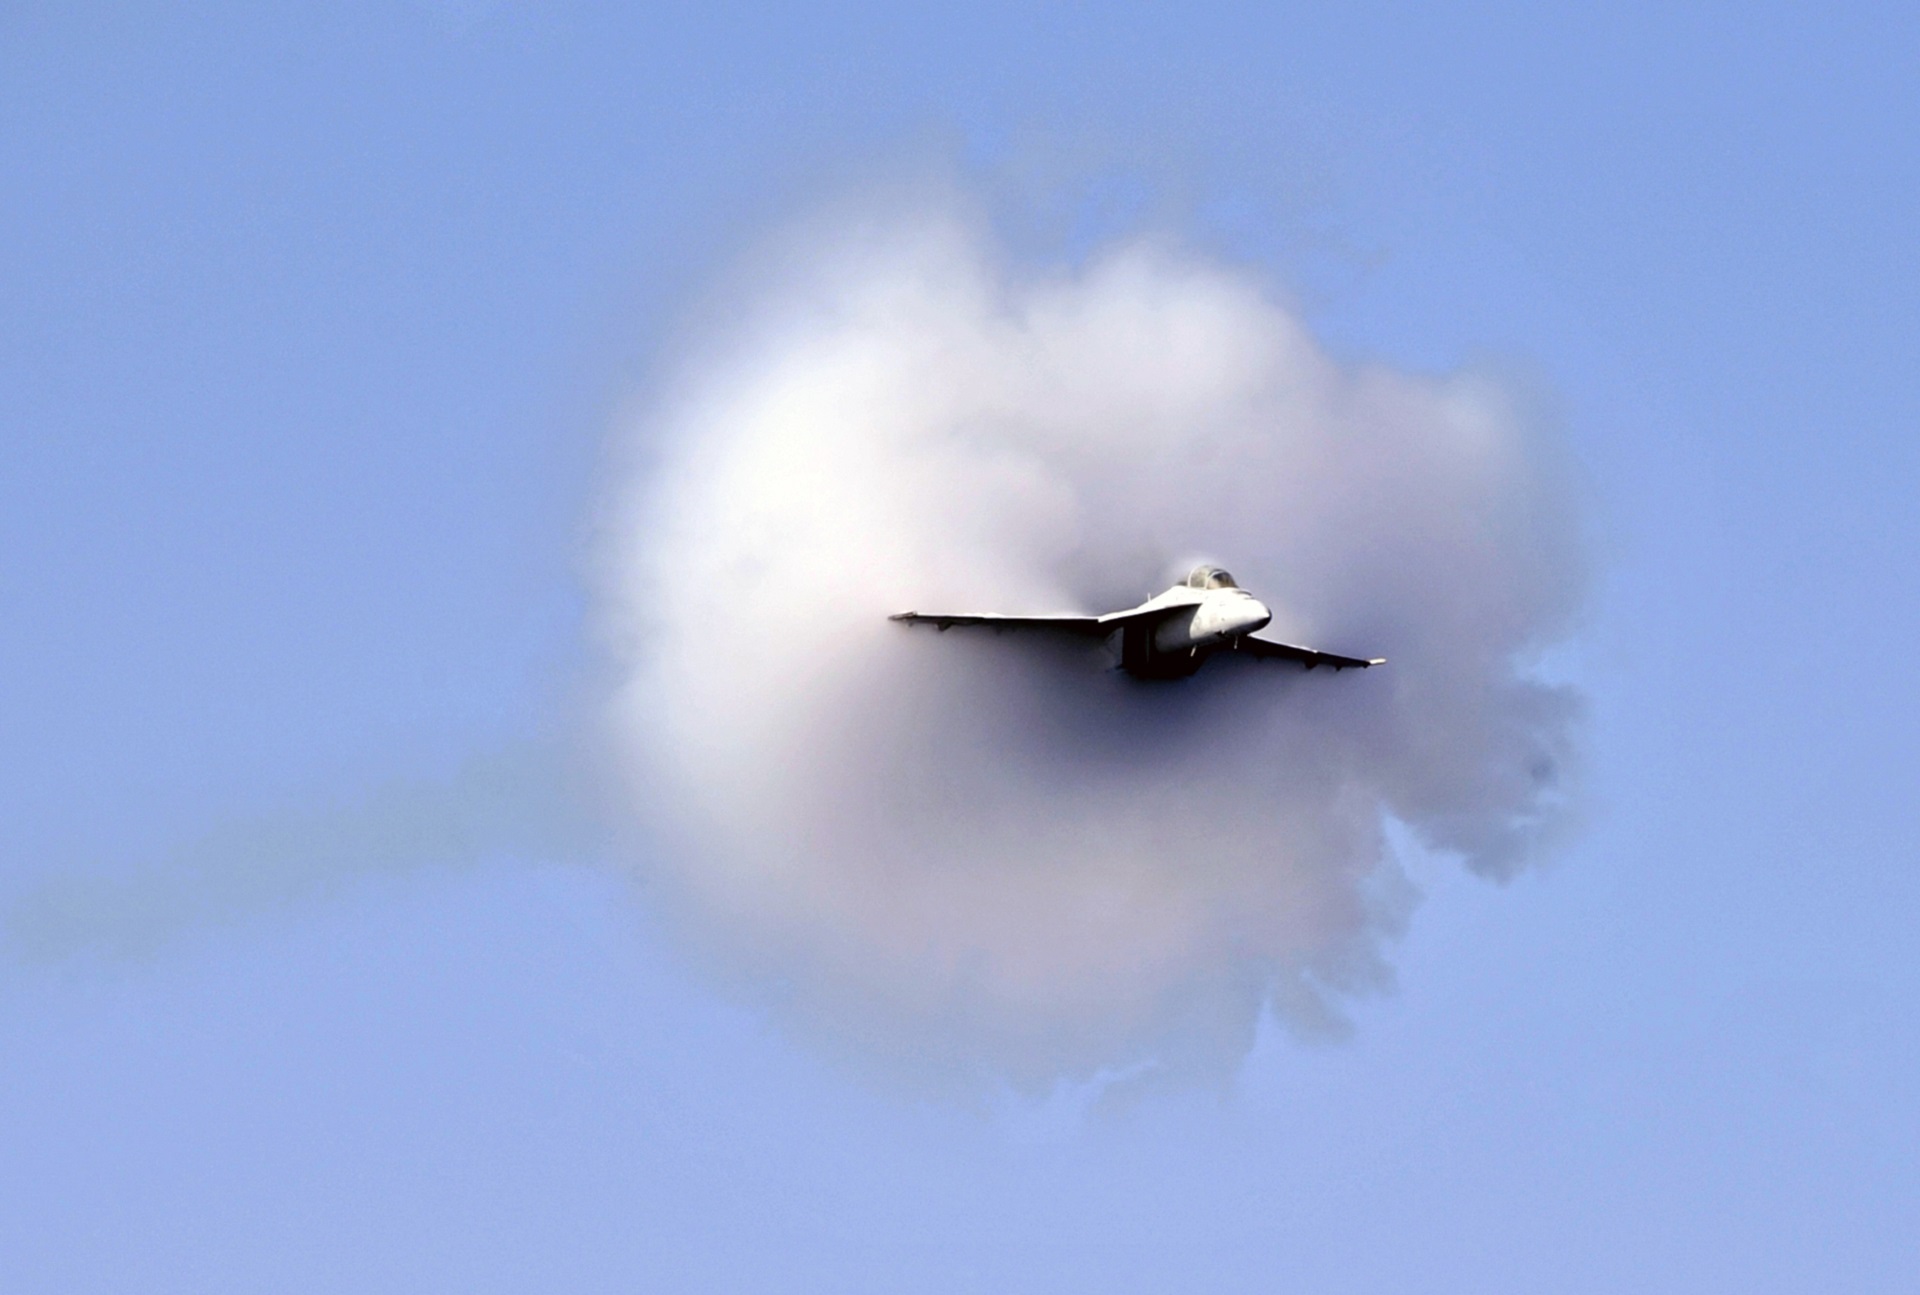 Supersonic Navy Jet Overcoming Sound Barrier Free Image Download